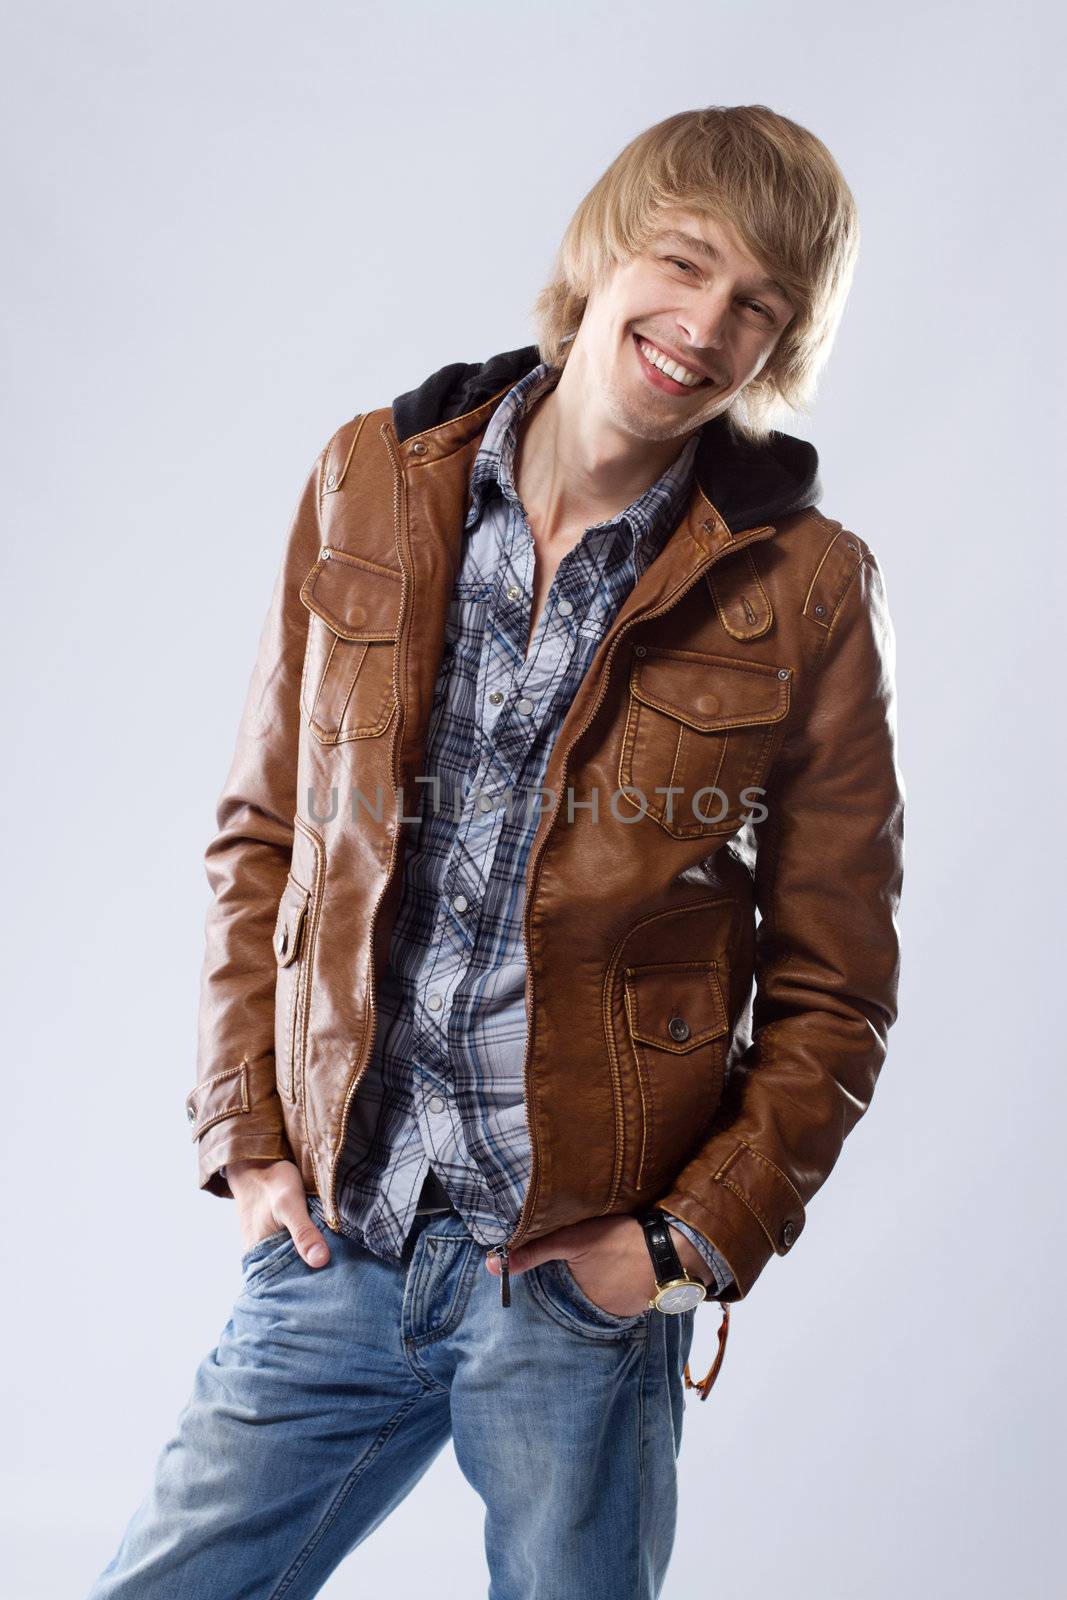 Handsome young man in leather jacket, studio portrait